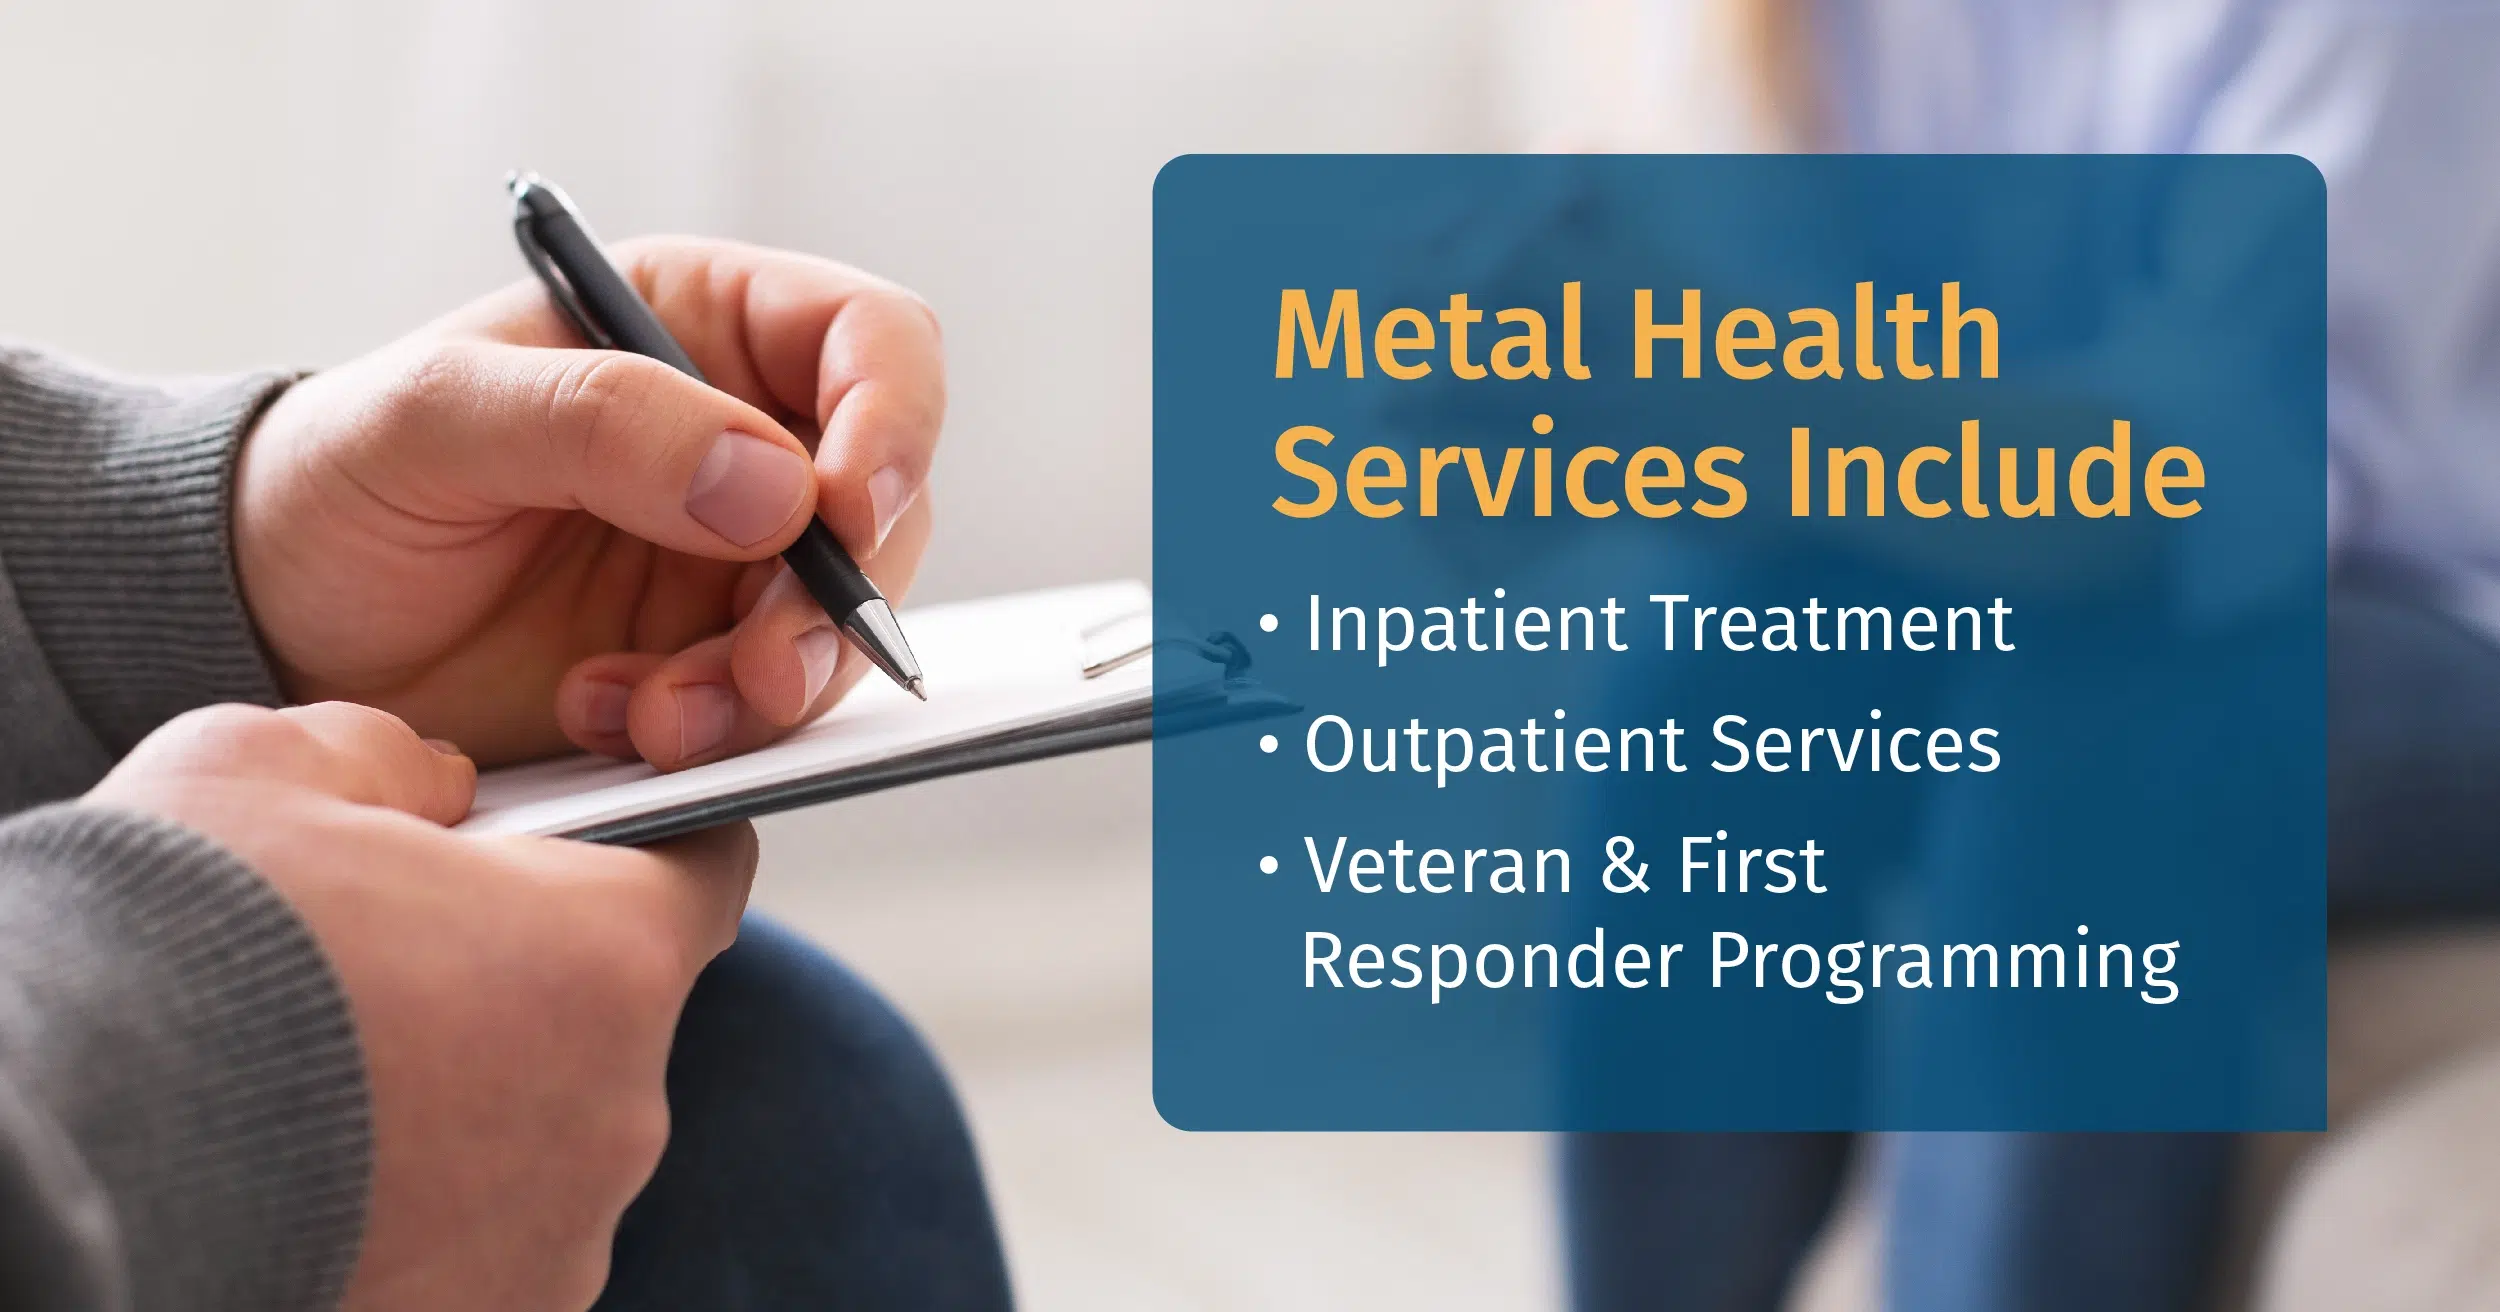 List of mental health services offered at The Recovery Team, including inpatient treatment, outpatient treatment, and veteran programming